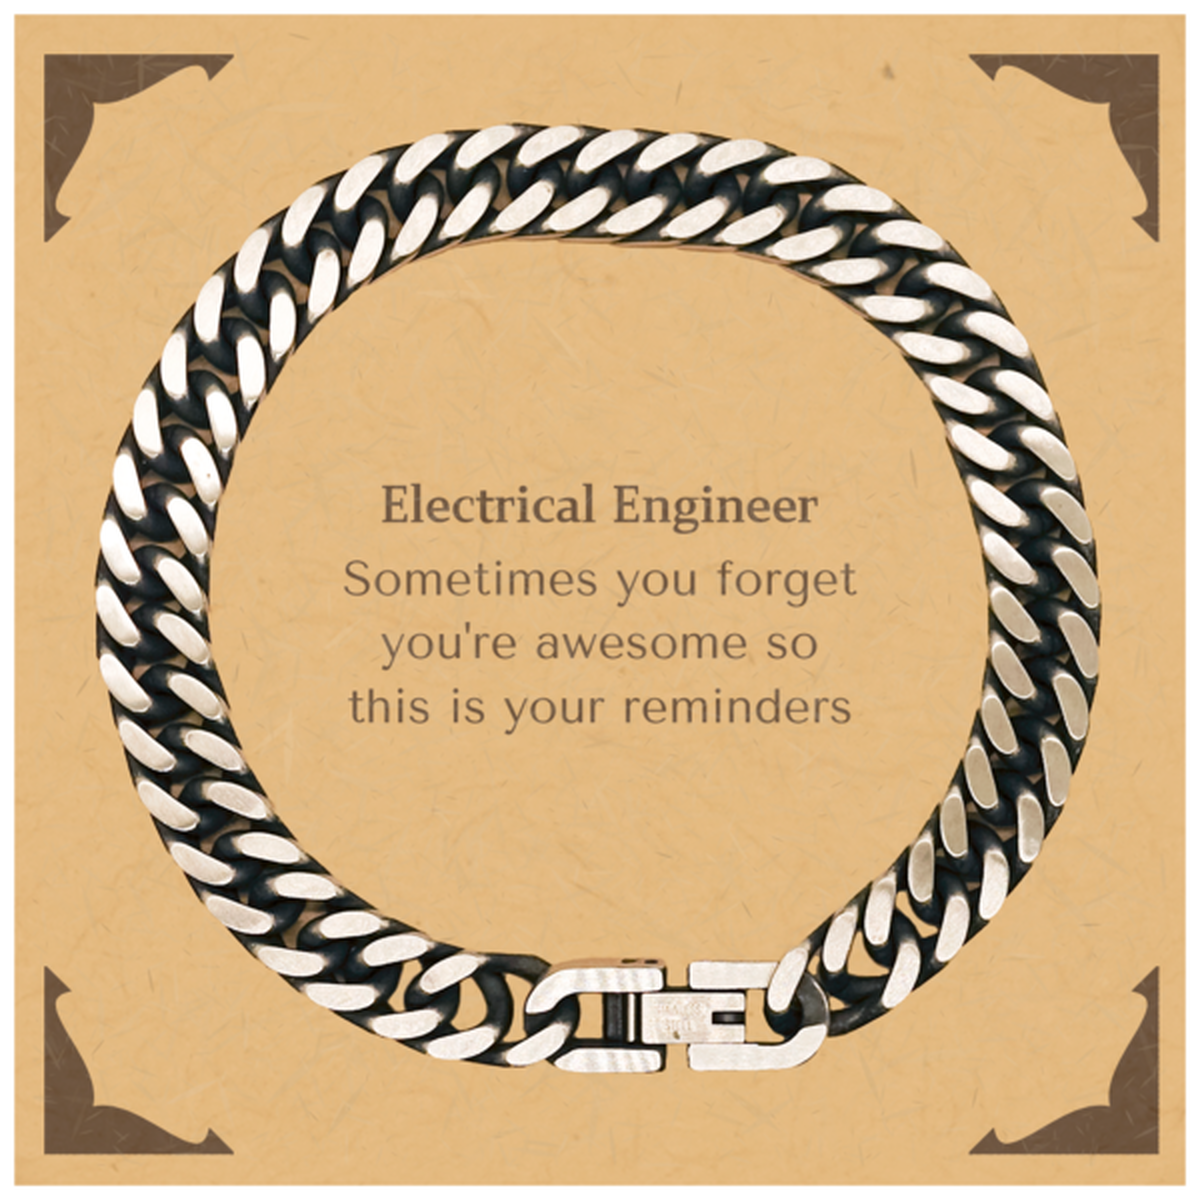 Sentimental Electrical Engineer Cuban Link Chain Bracelet, Electrical Engineer Sometimes you forget you're awesome so this is your reminders, Graduation Christmas Birthday Gifts for Electrical Engineer, Men, Women, Coworkers